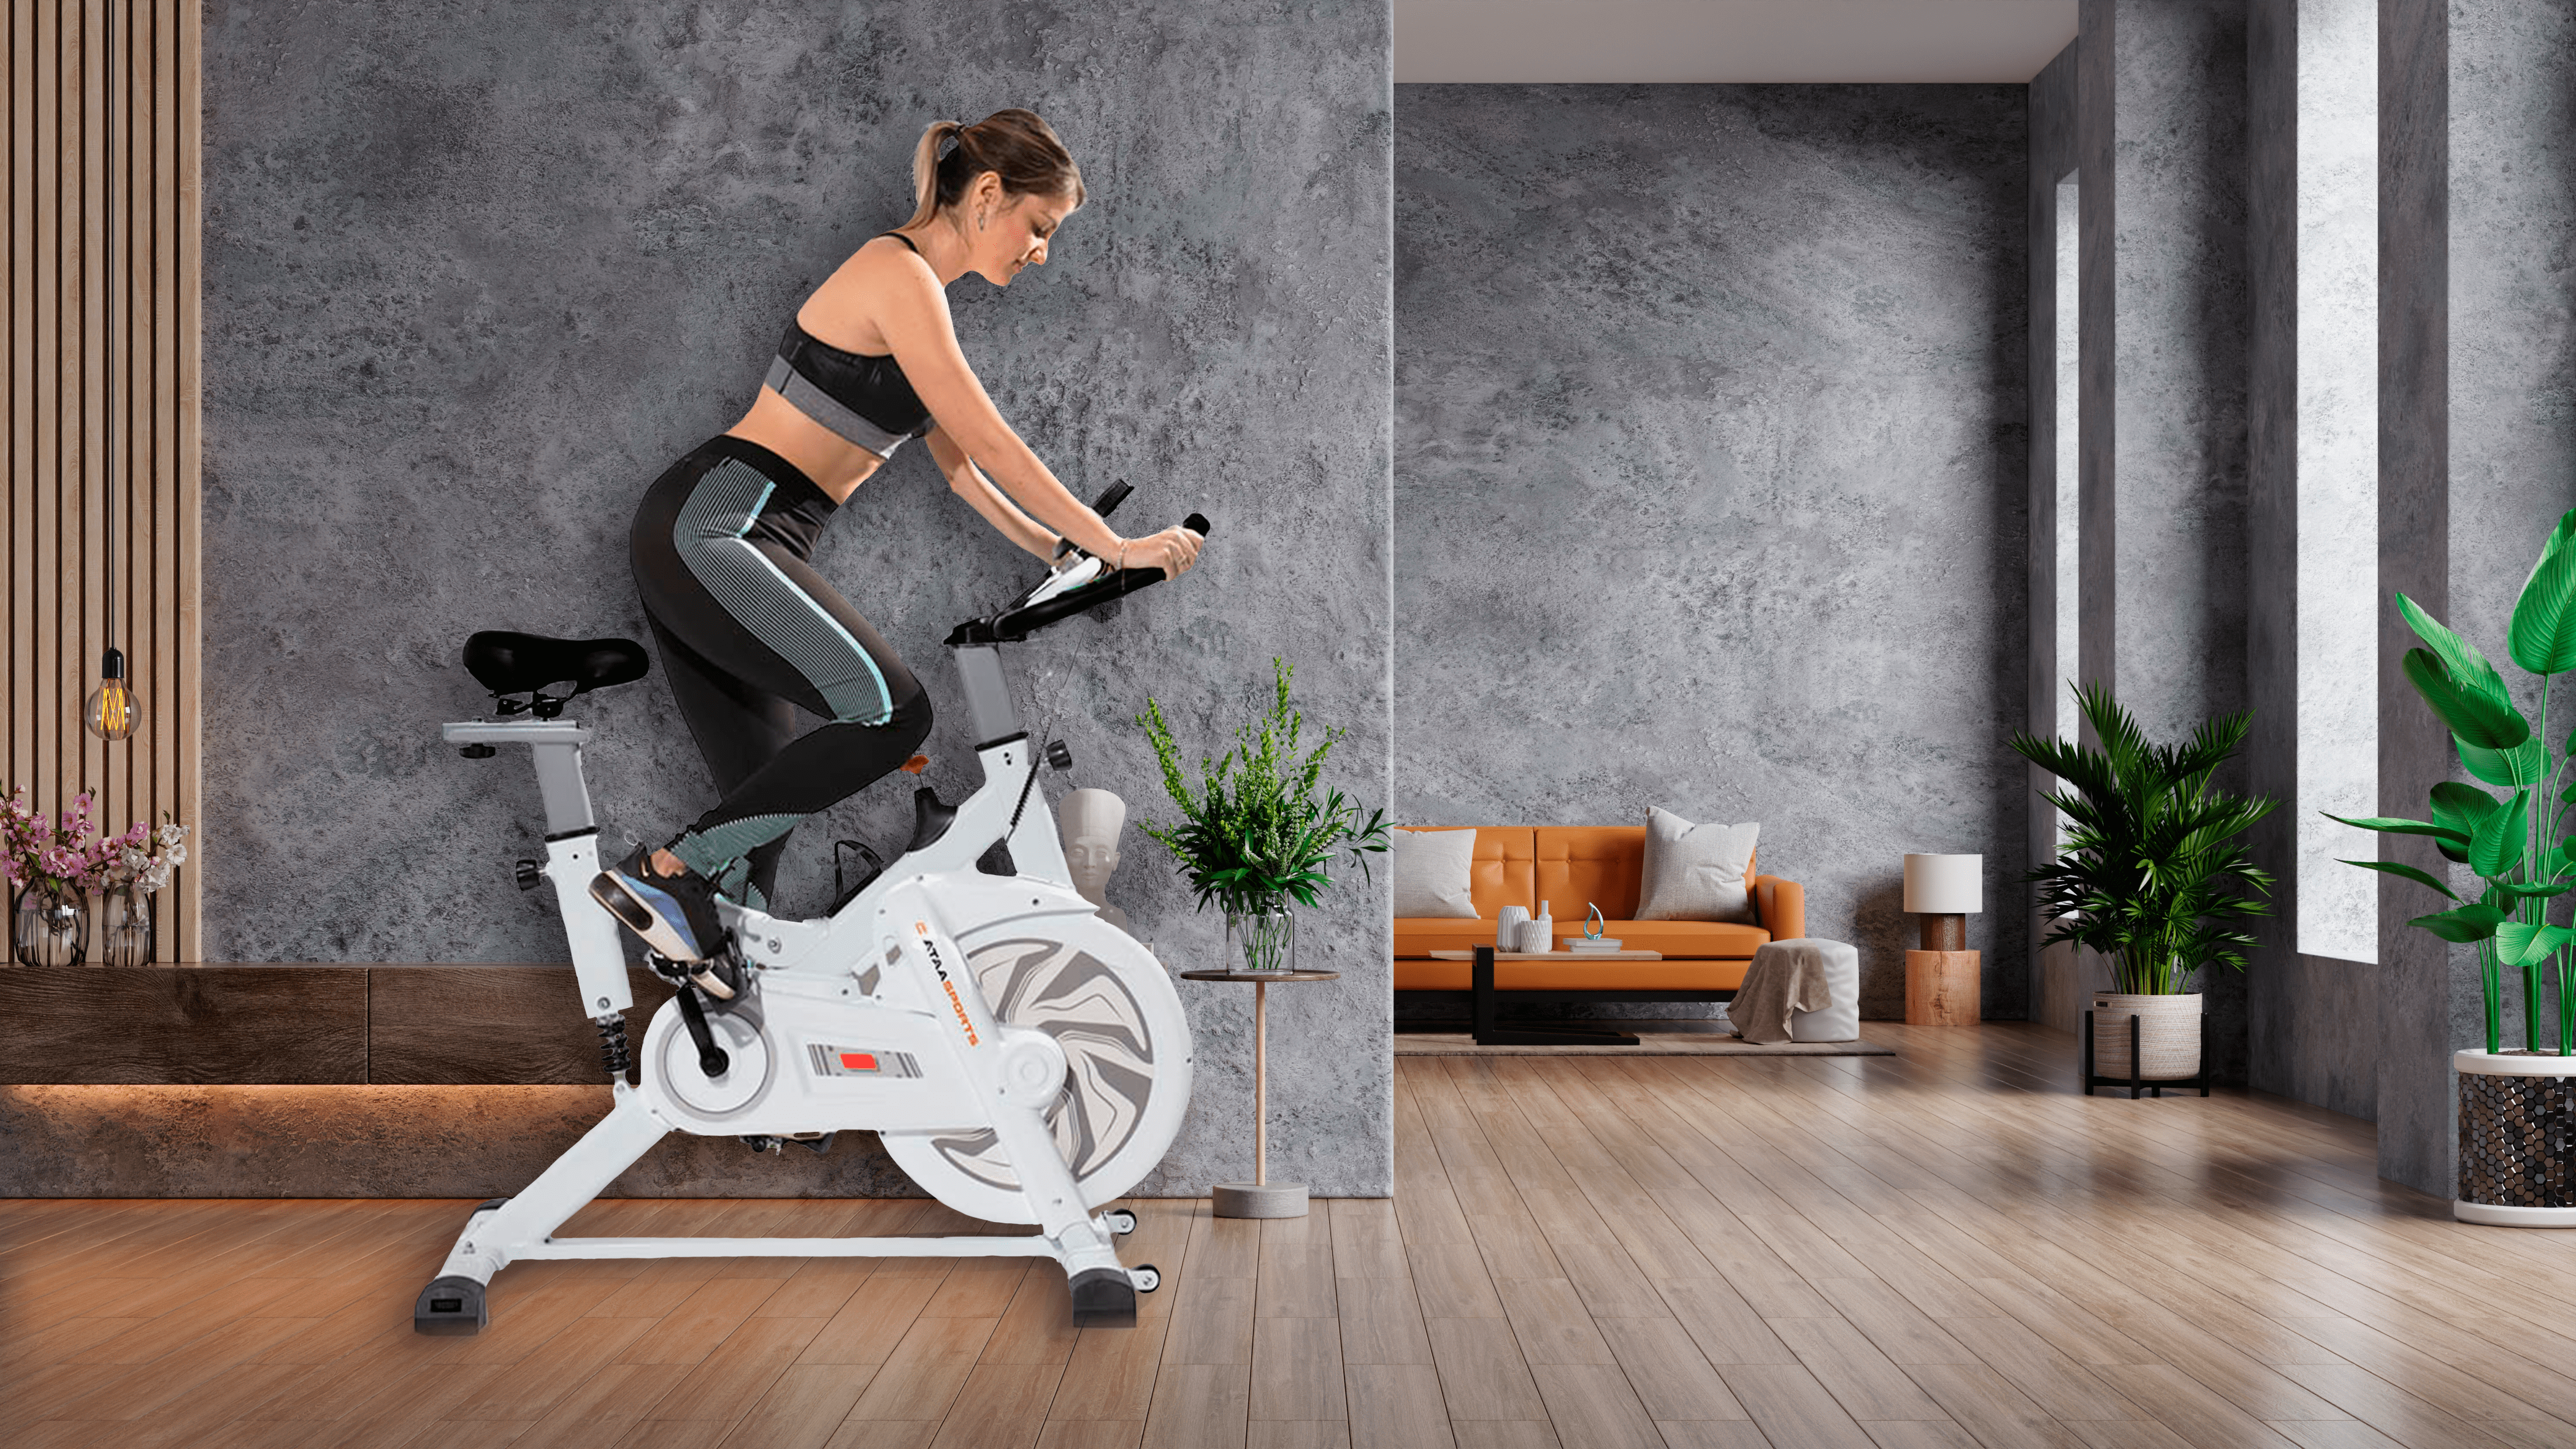 HOW TO CHOOSE THE IDEAL SPINNING BIKE TO EXERCISE AT HOME? 4 IMPORTANT KEYS